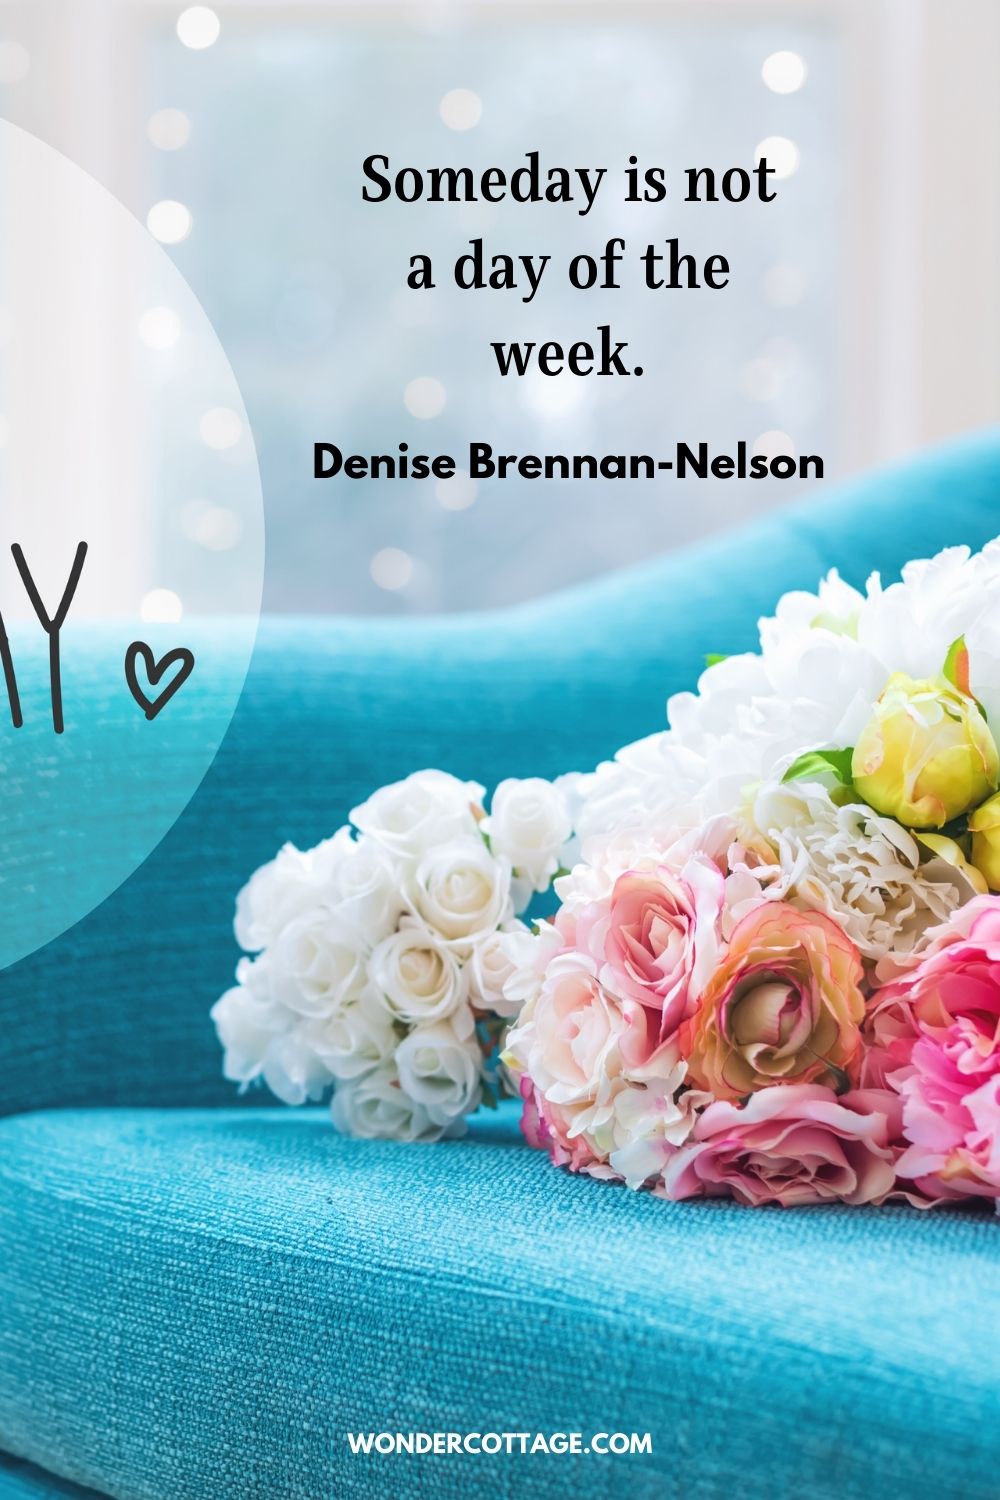 Someday is not a day of the week. Denise Brennan-Nelson